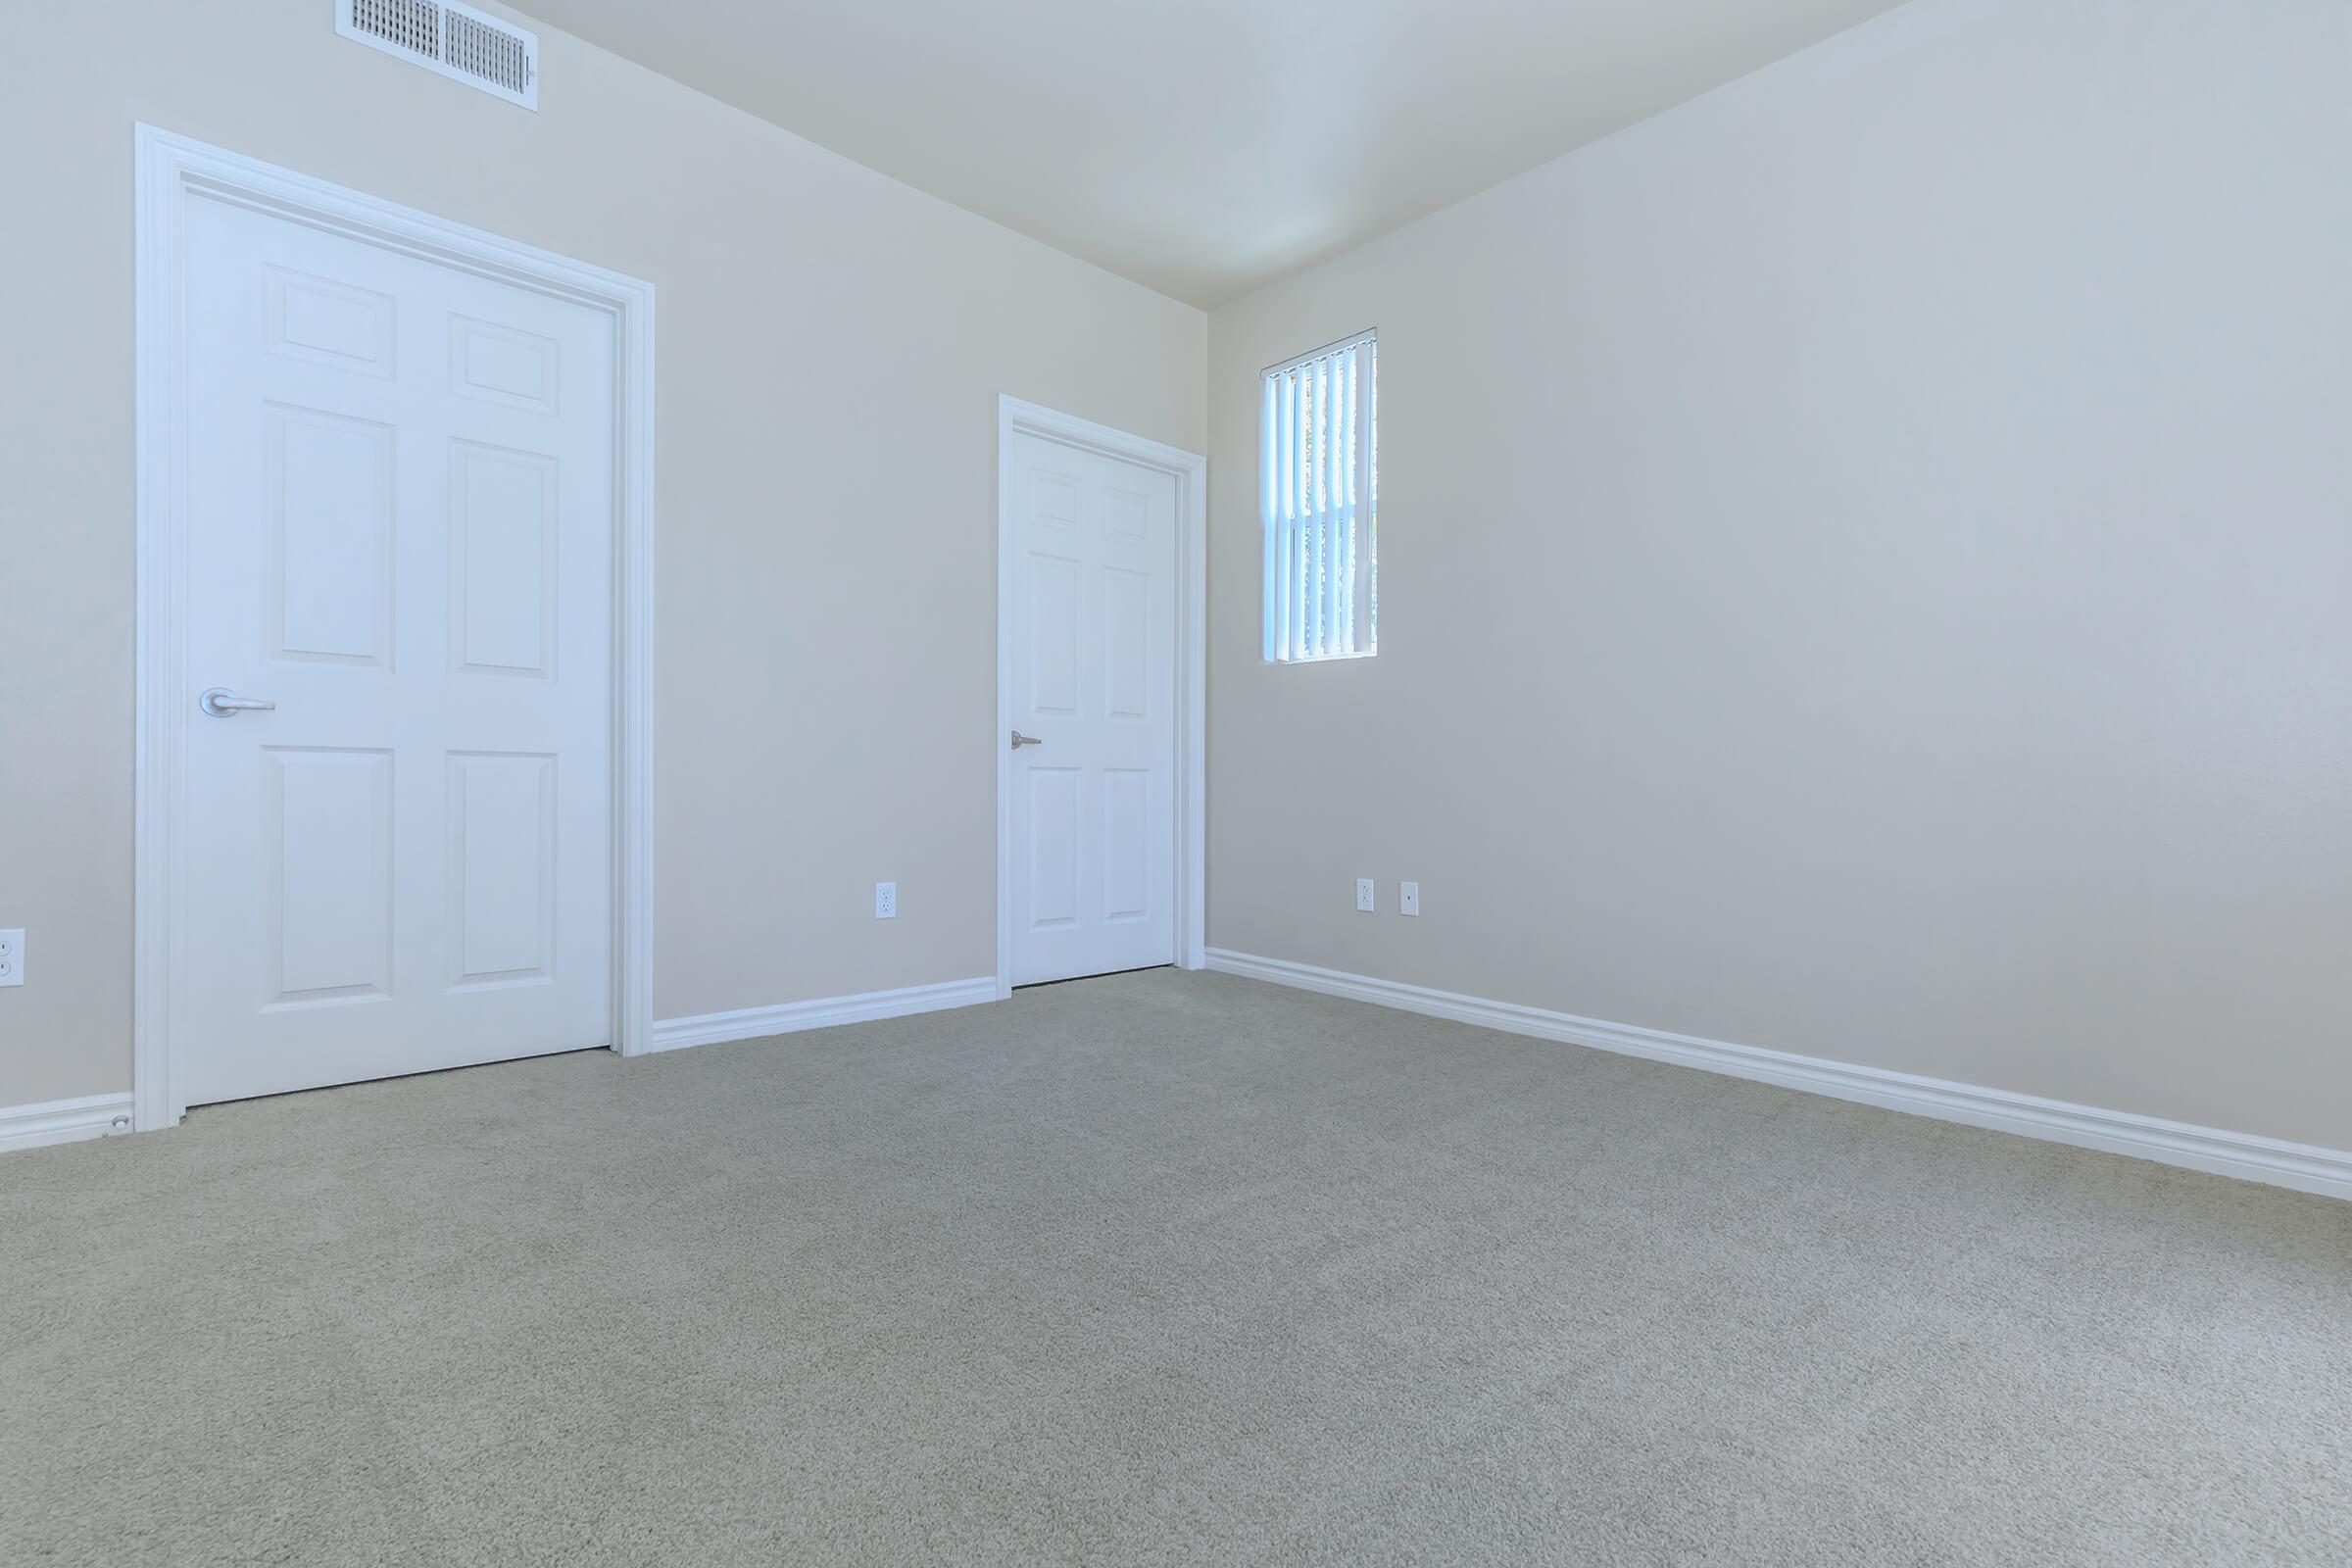 Vacant carpeted bedroom with closed closet door